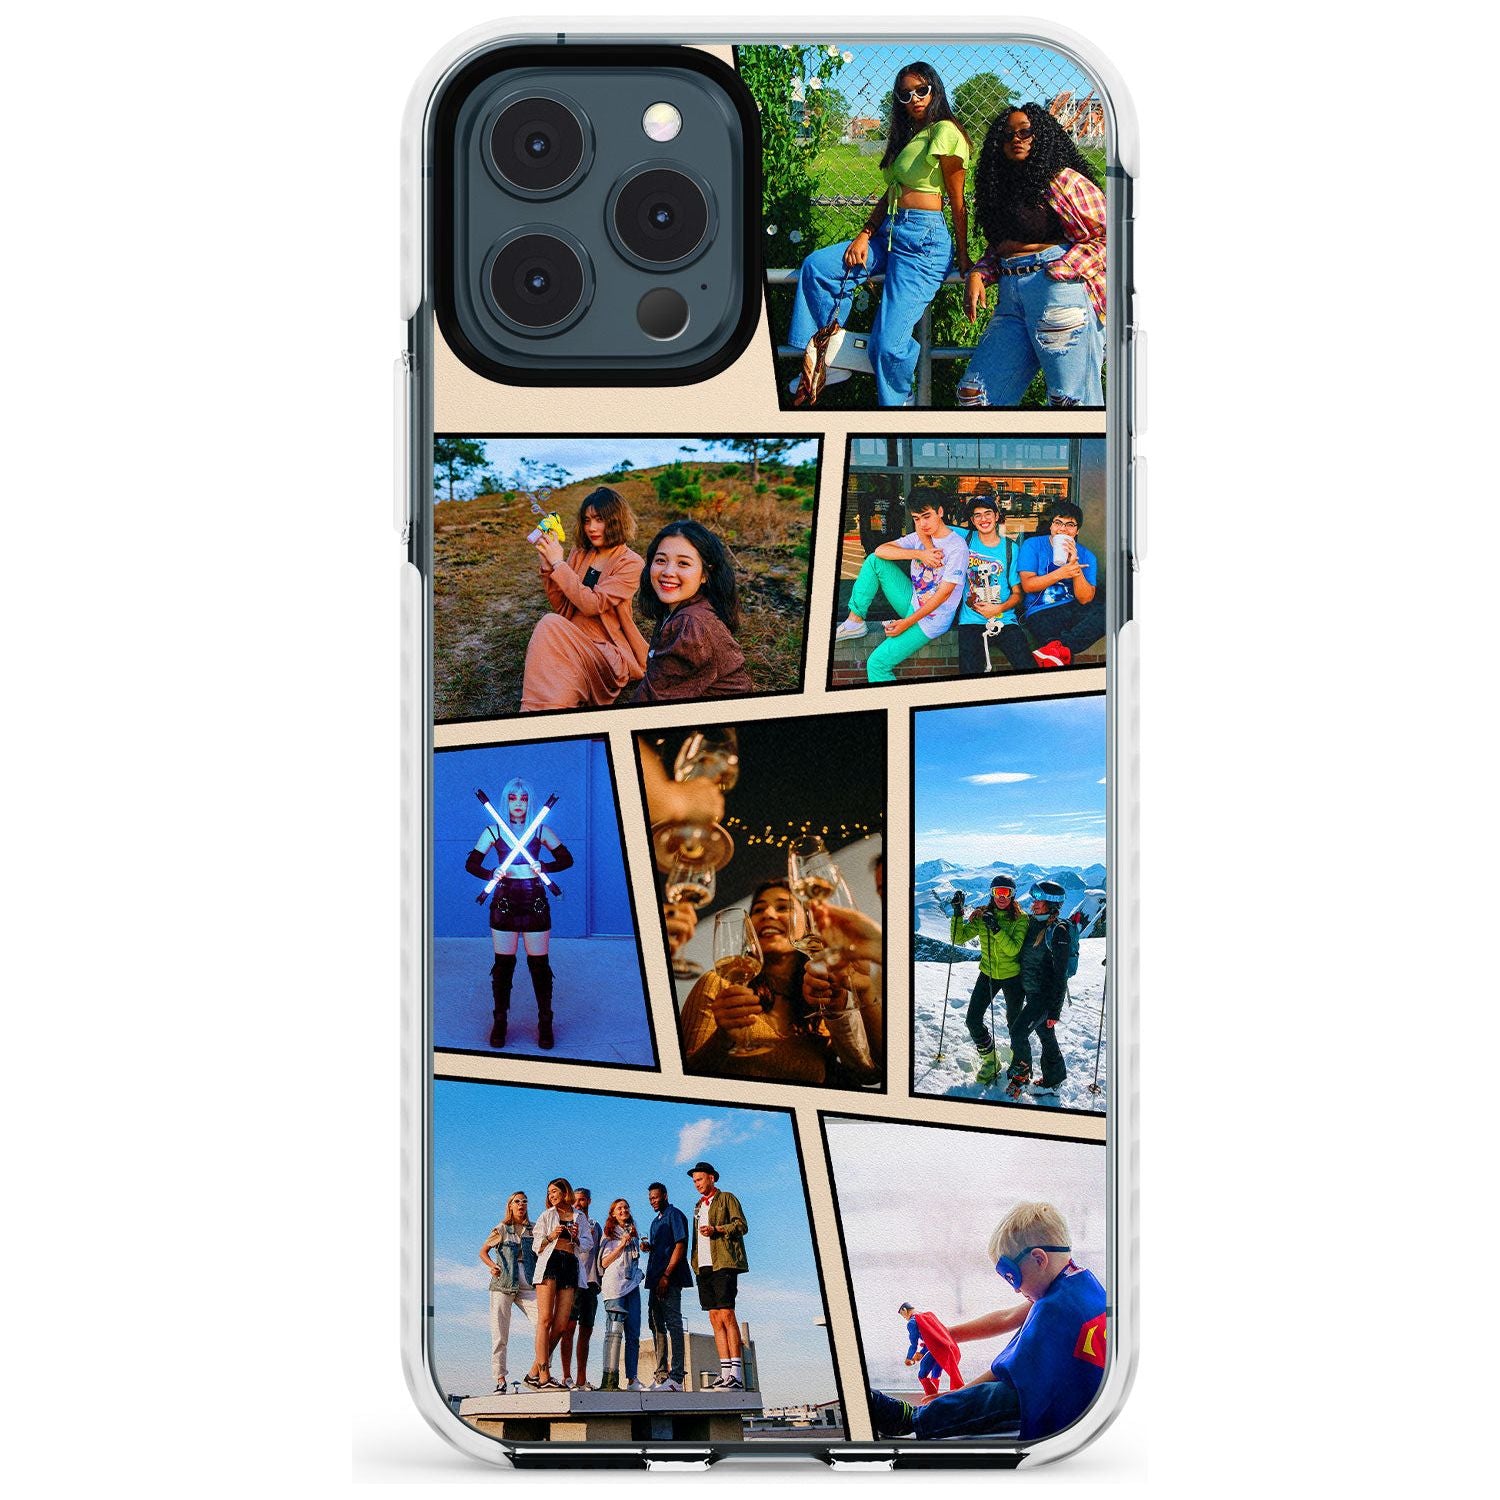 Comic Strip Photo Impact Phone Case for iPhone 11 Pro Max